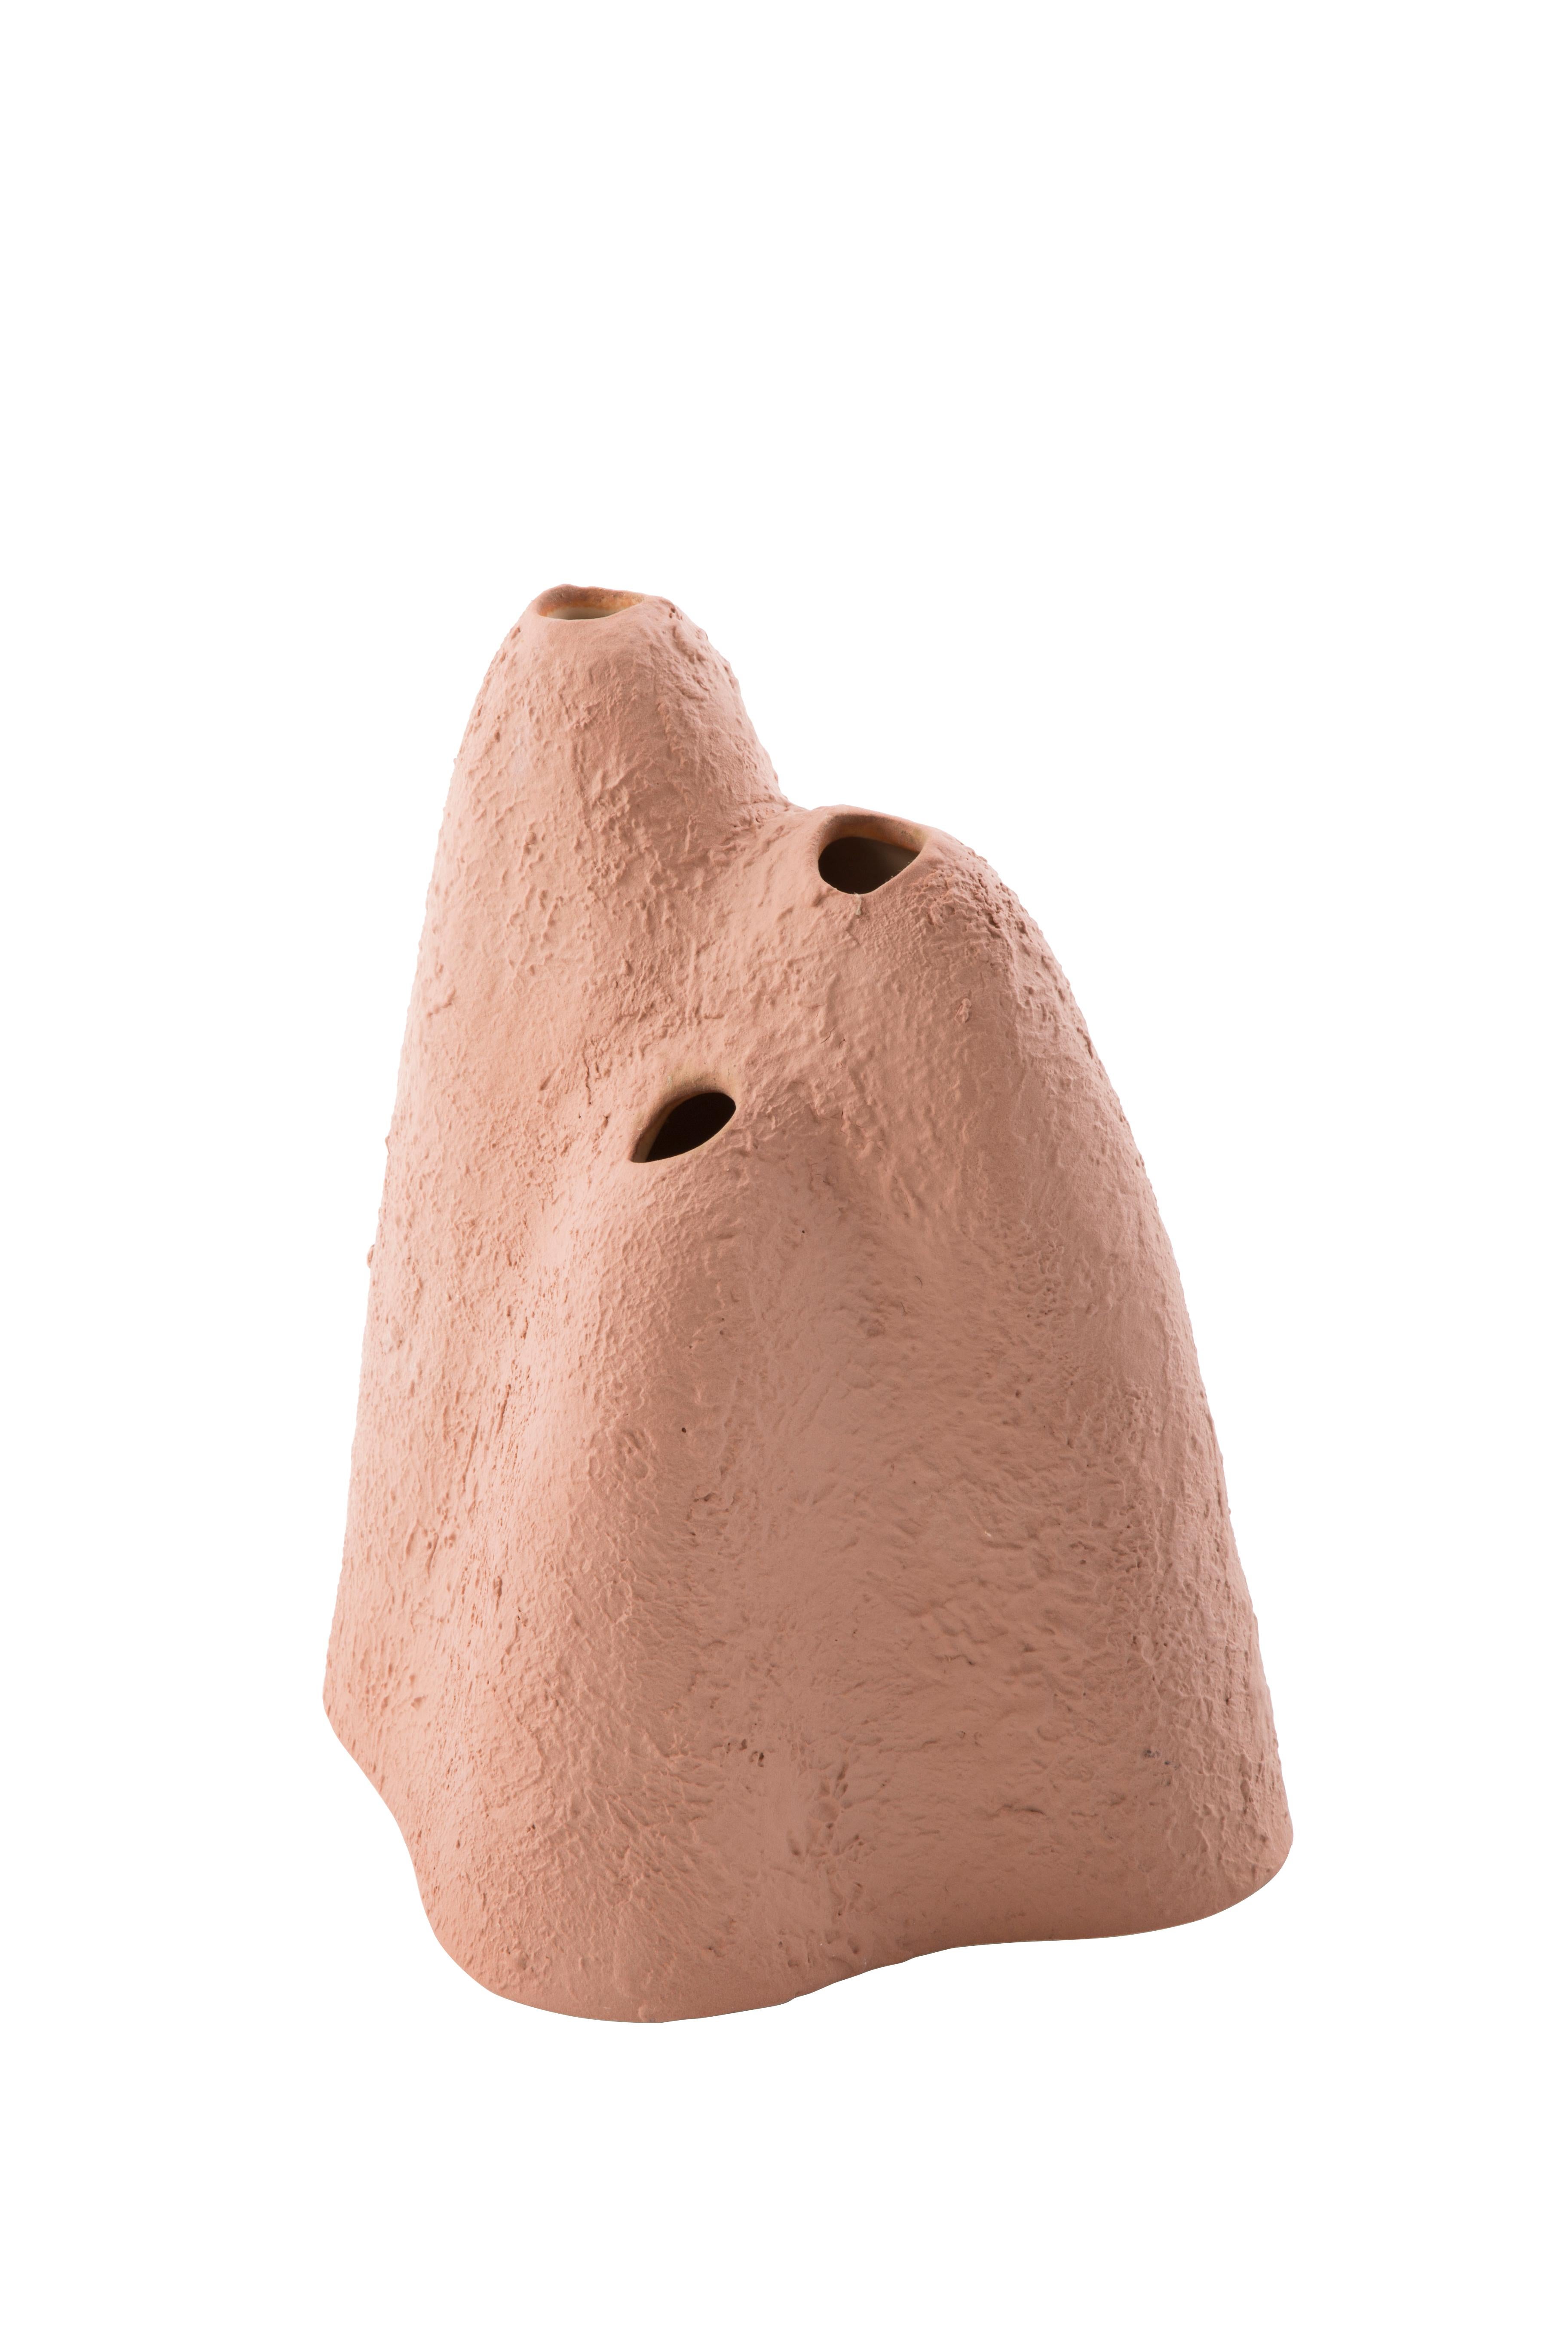 Mountain Big Terracotta Vase by Pulpo
Dimensions: D25 x W20 x H31 cm
Materials: ceramic

Also available in different colours. Please contact us.

Making a dramatic entrance overtop your tablescape below comes the mountain vase. Its solid ceramic